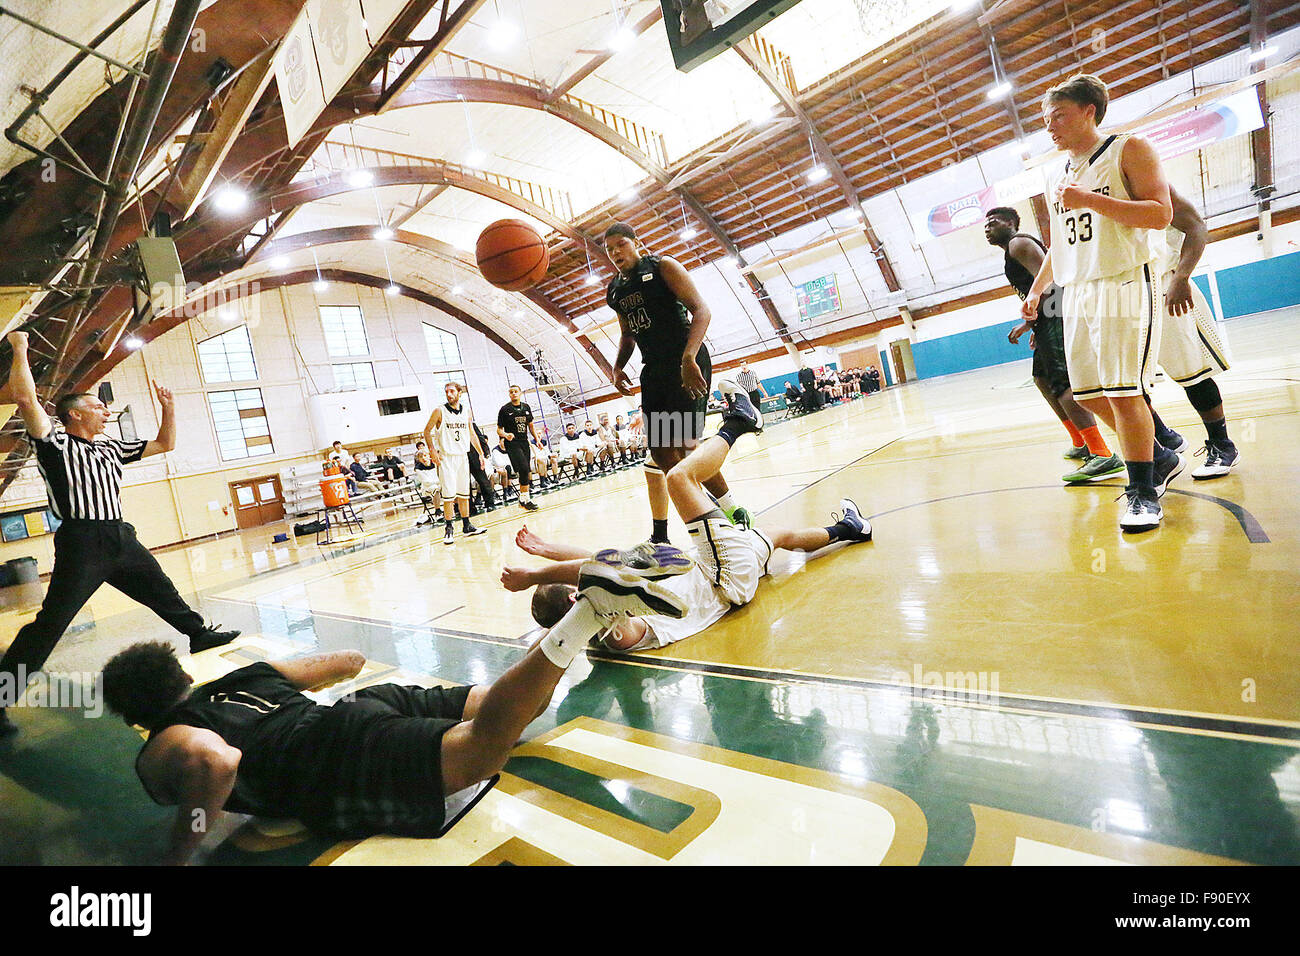 Angwin, CA, USA. 11th Dec, 2015. The referee signals a foul after Pacific Union College's Devon Marshall, bottom left, and Johnson & Wales' Andrew Bonner, center, went down during the Pioneers game against Johnson & Wales University at Pacific Union College in Angwin on Friday. © Napa Valley Register/ZUMA Wire/Alamy Live News Stock Photo